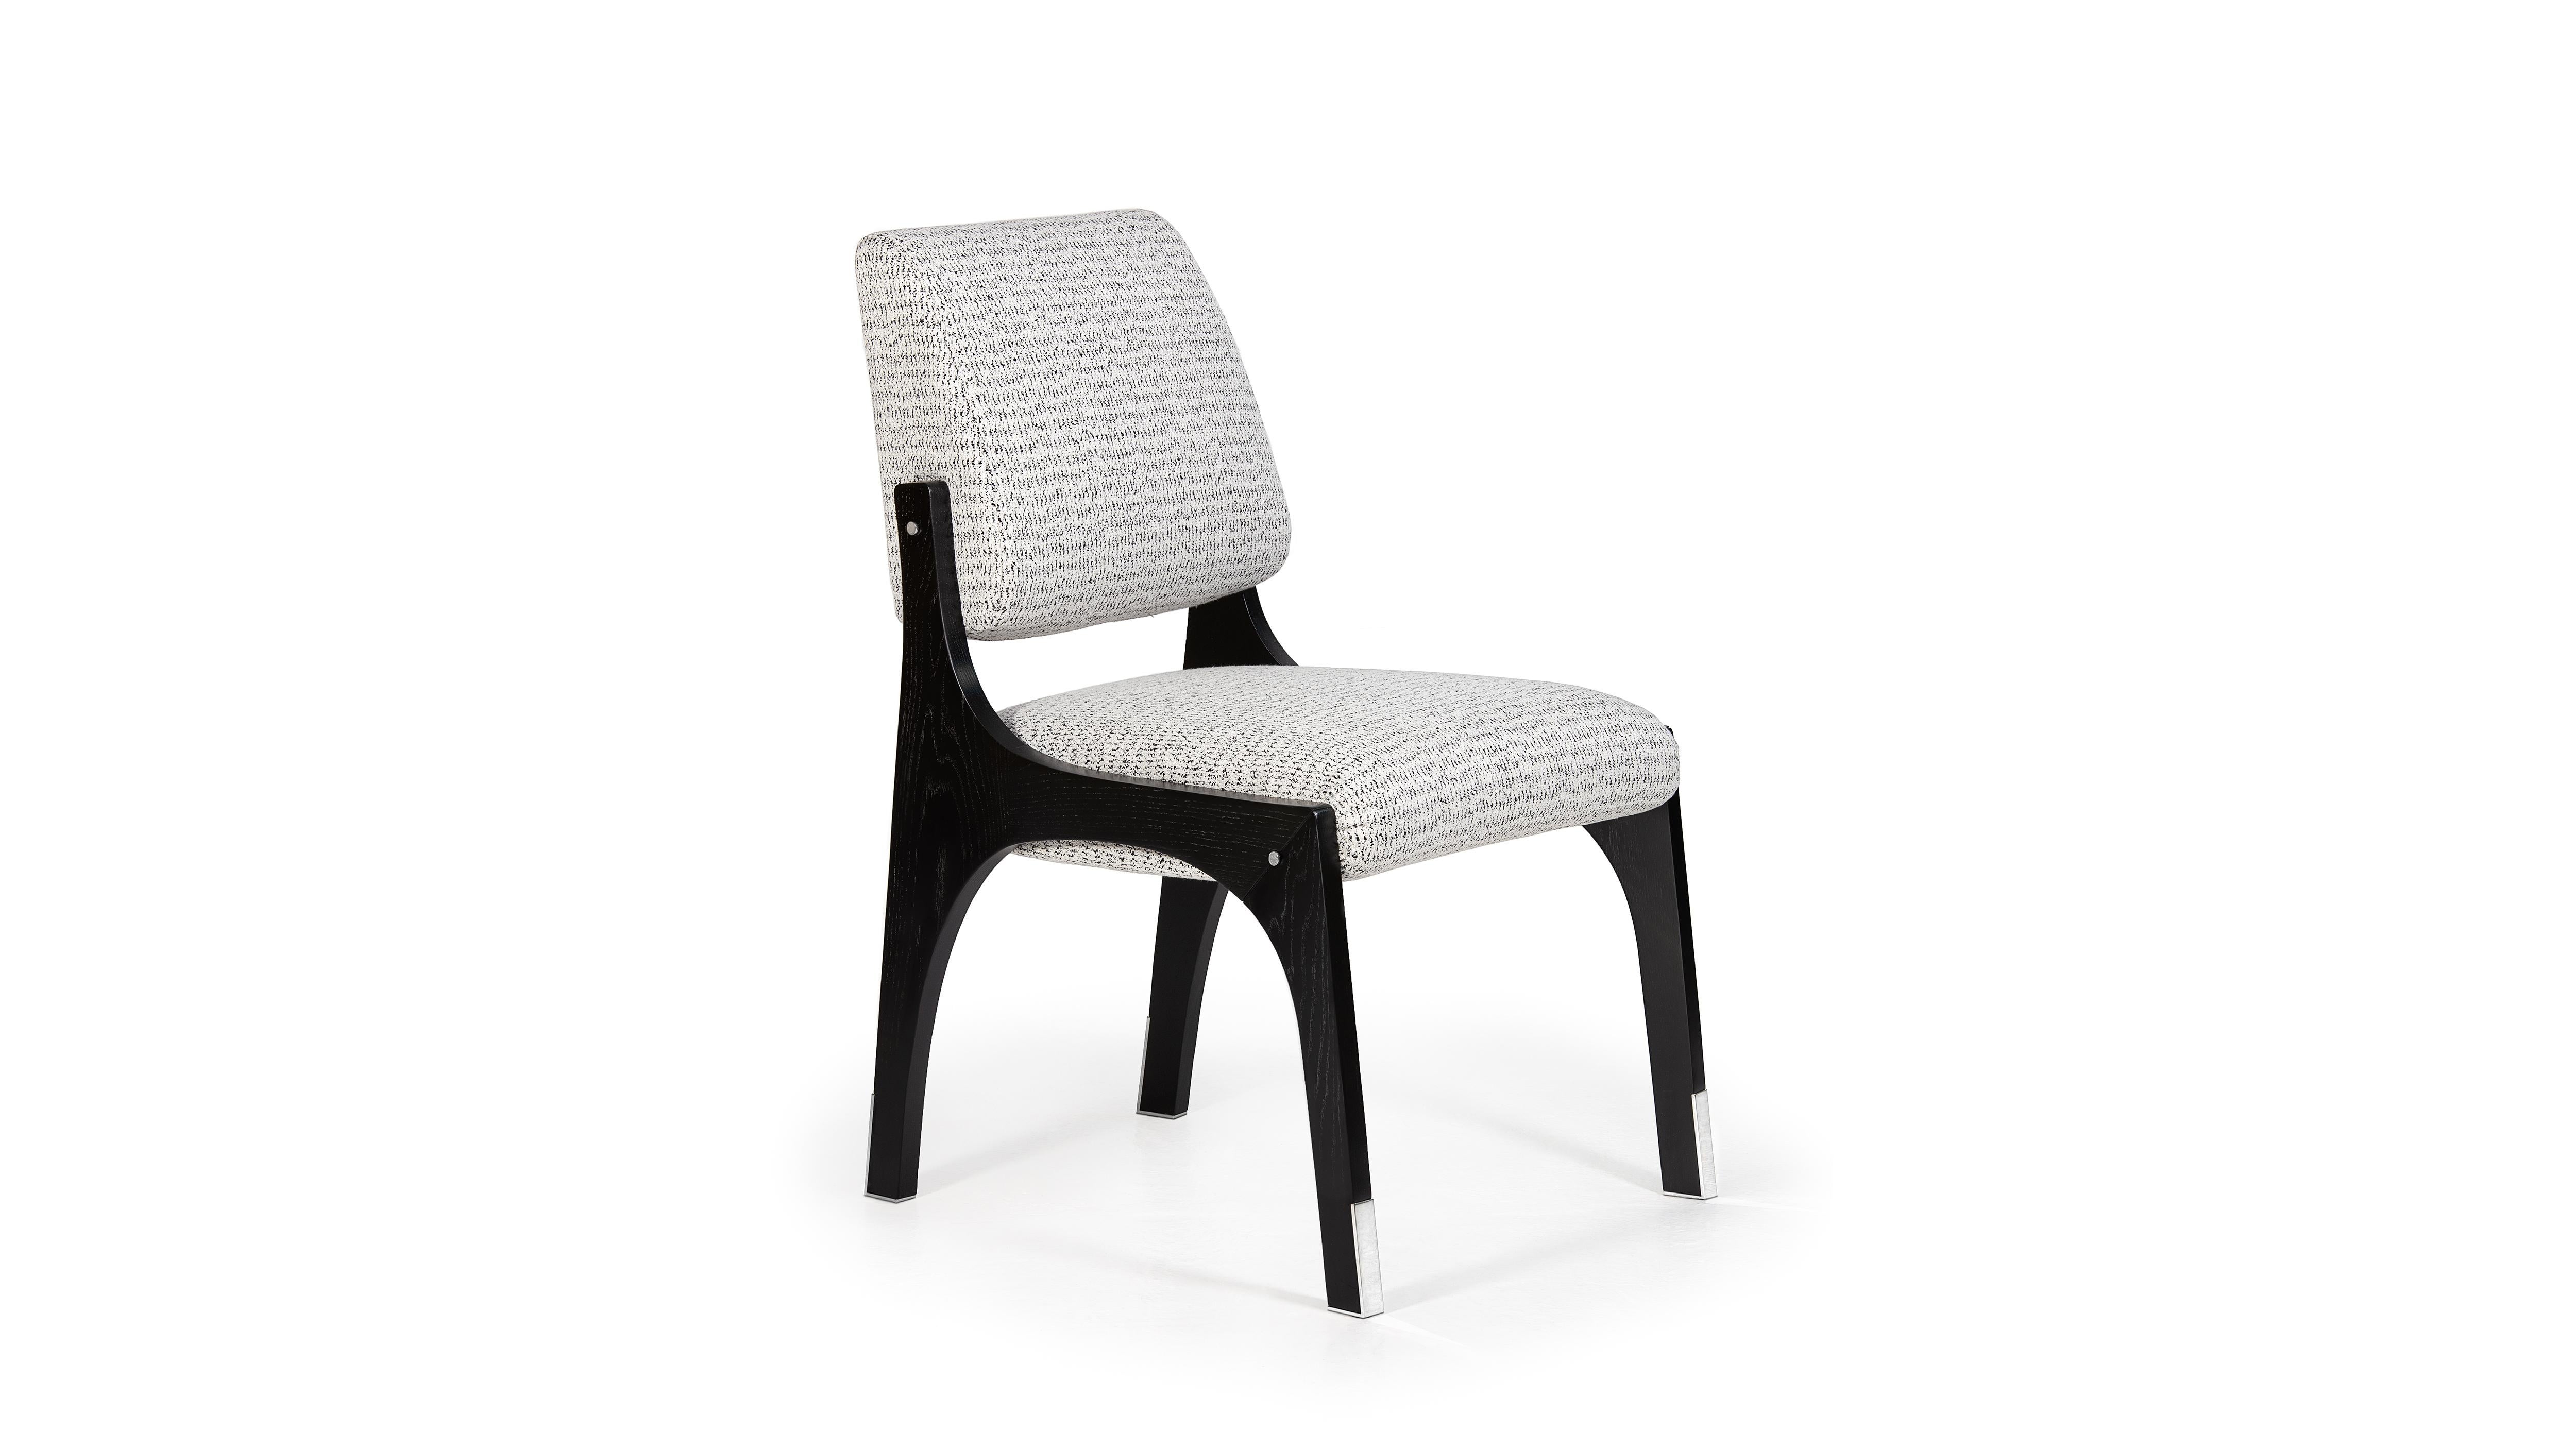 Arches Dining Chair II by InsidherLand
Dimensions: D 67 x W 53 x H 89 cm.
Materials: Black lacquered wooden frame, stainless steel, fabric InsidherLand Fusion ref. 992.
10 kg.
Available in different fabrics.

Since the Renaissance, many attempts